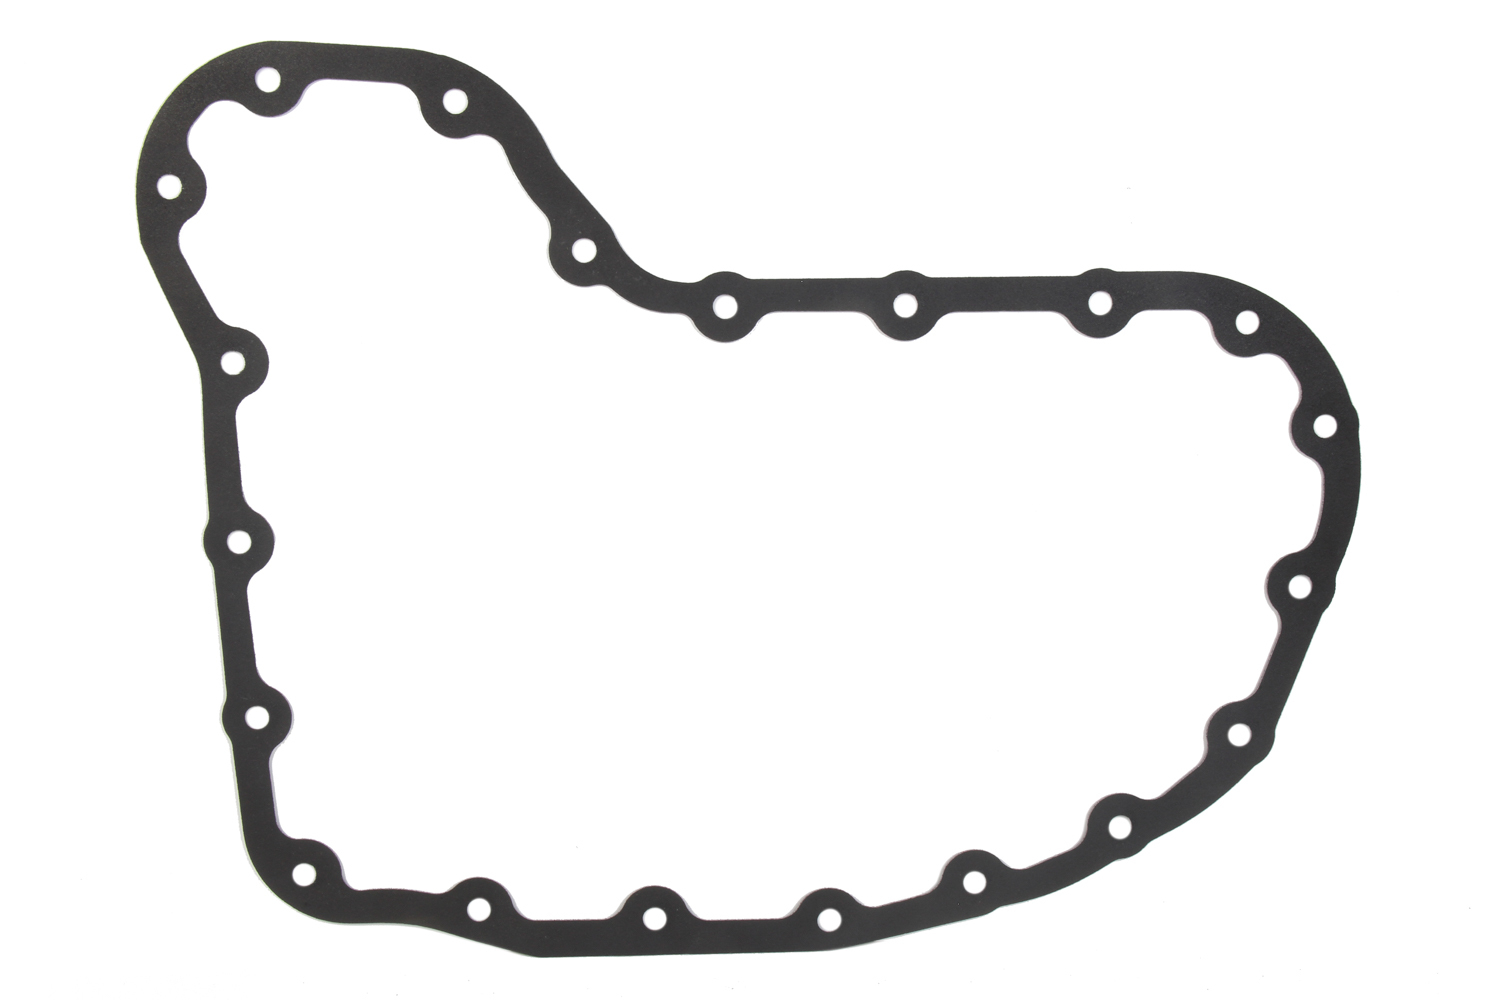 Cometic Gaskets C14113-060 Oil Pan Gasket, 0.060 in Thick, 1-Piece, Rubber Coated Aluminum, Toyota V6, Each